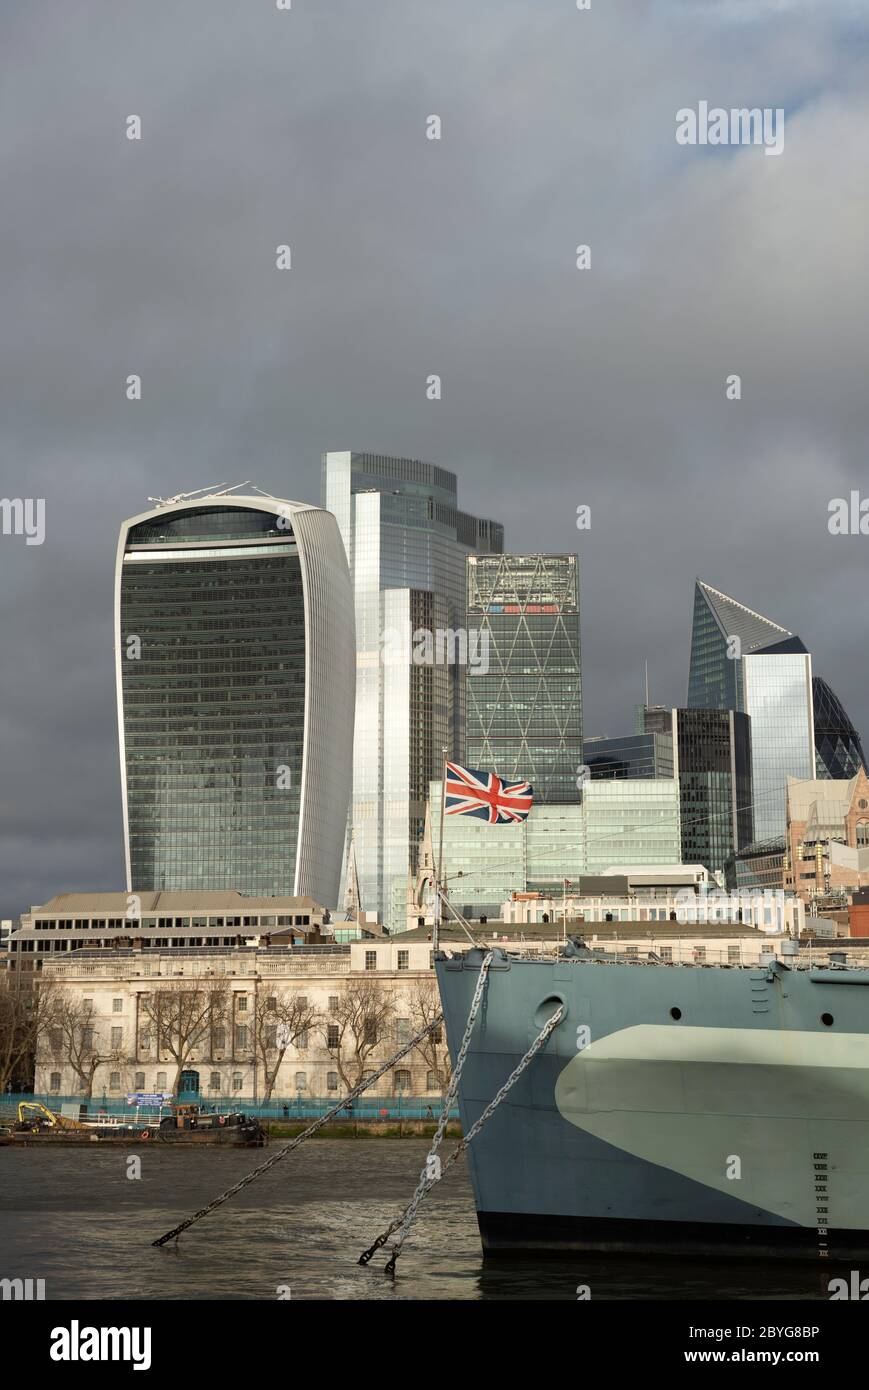 City of London glass buildings financial district skyline and bow of HMS Belfast as seen from South Bank in beautiful sunny weather with cloudy sky. Stock Photo